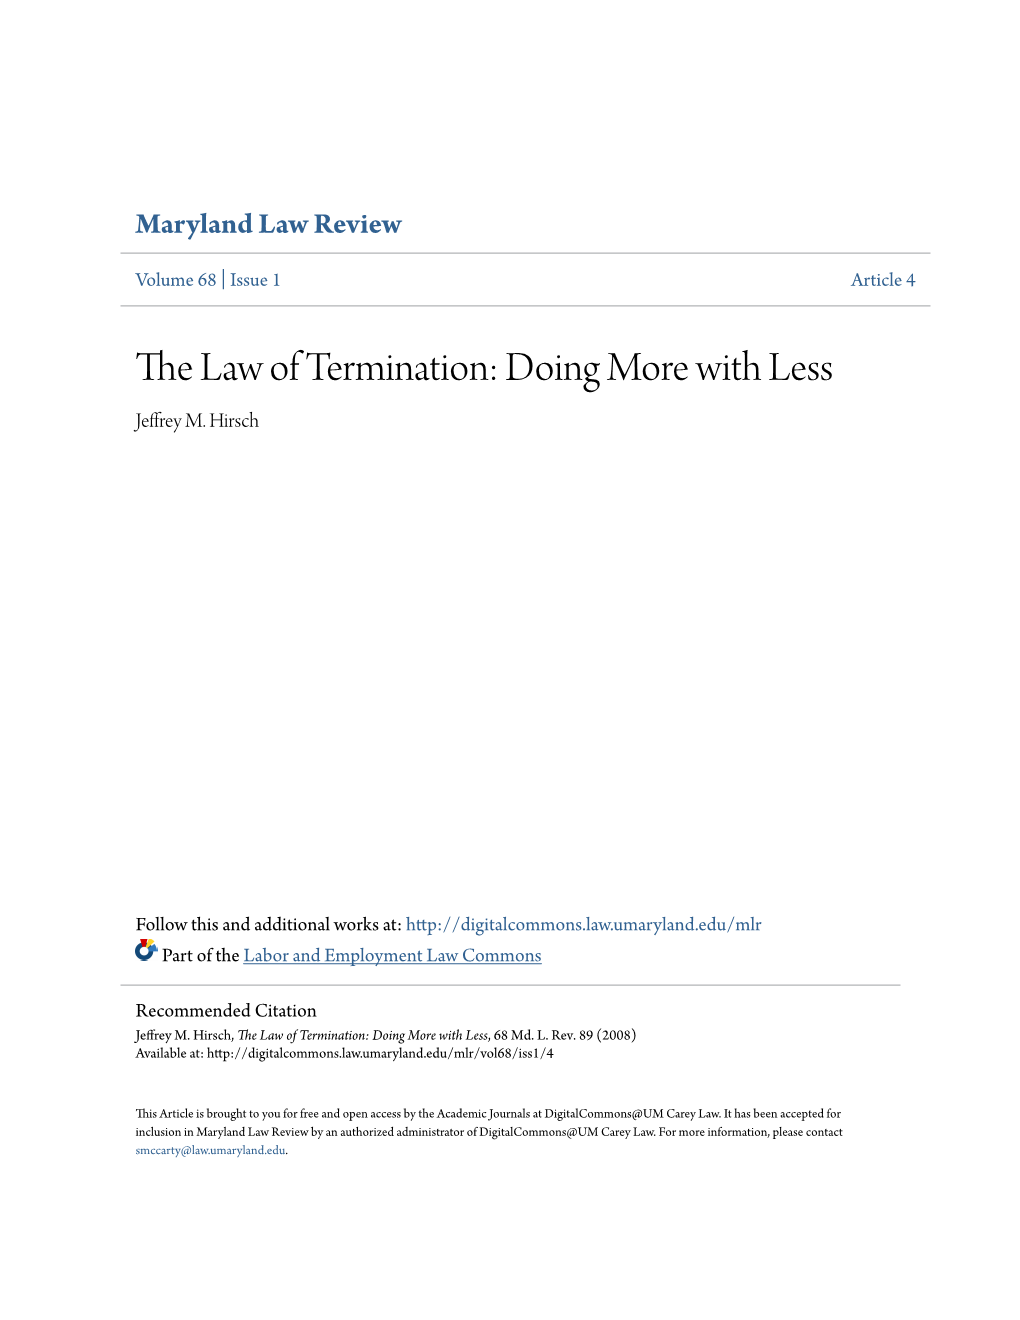 The Law of Termination: Doing More with Less Jeffrey M